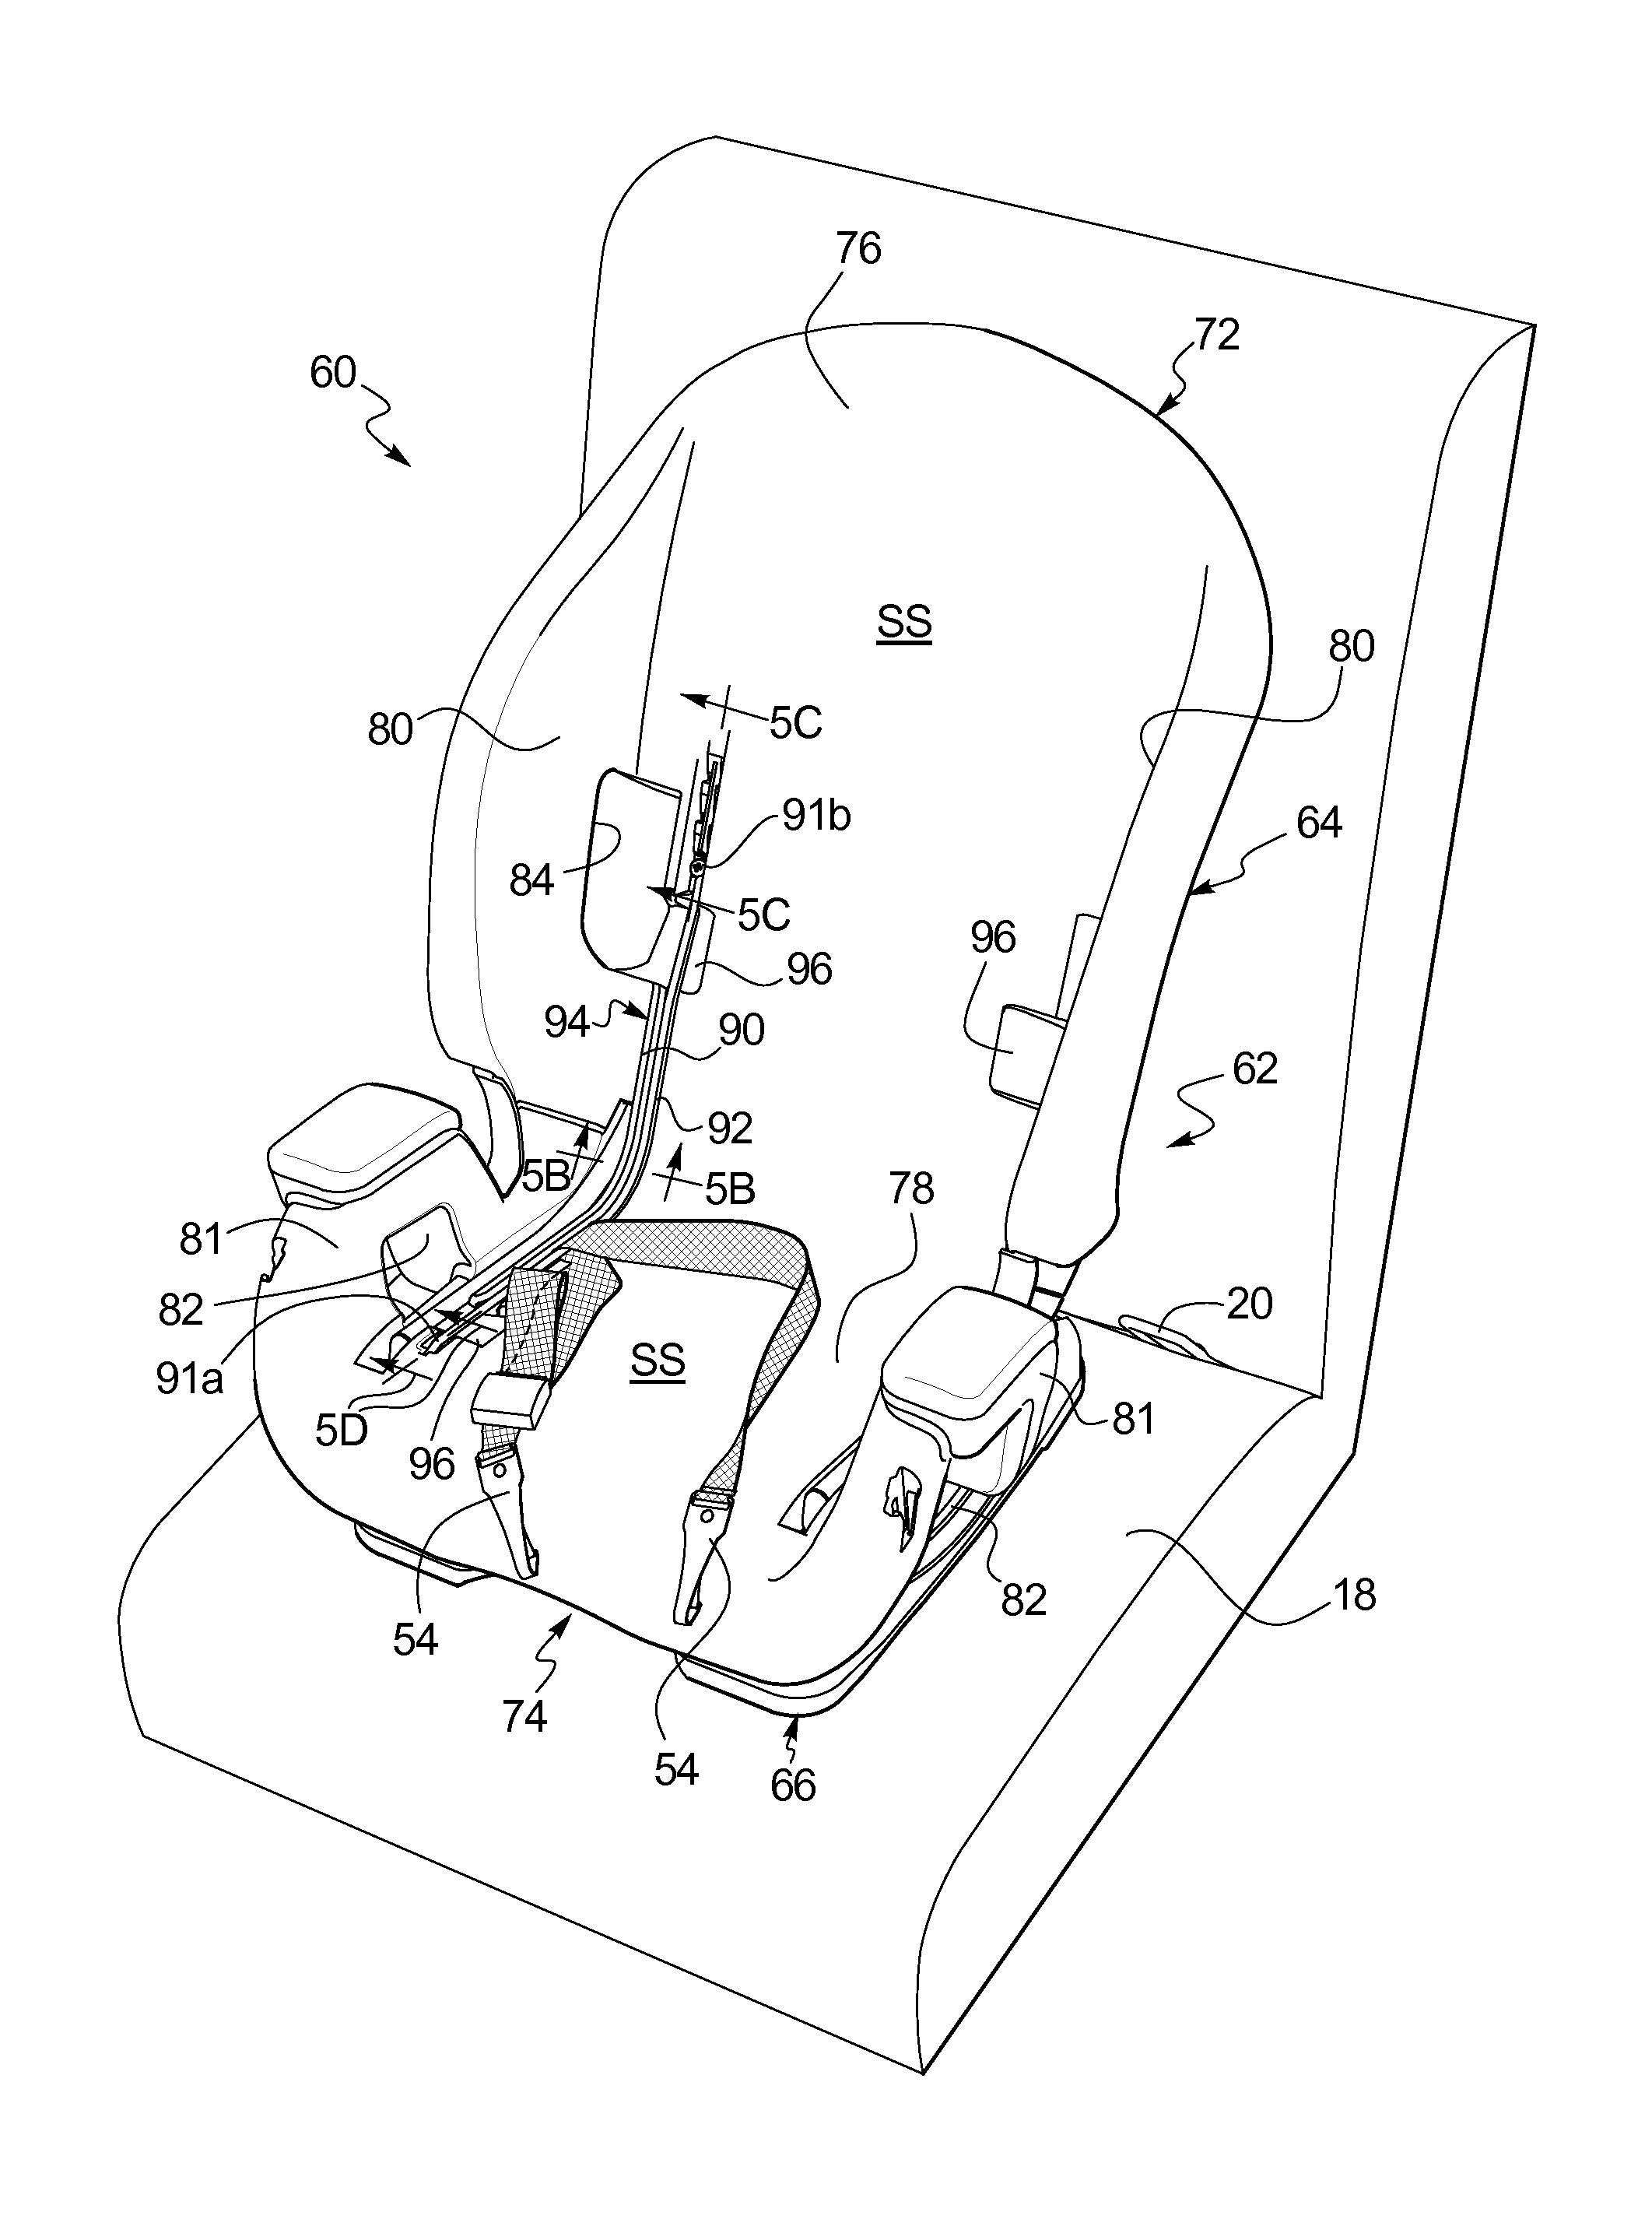 Anchor latch assembly for child restraint system